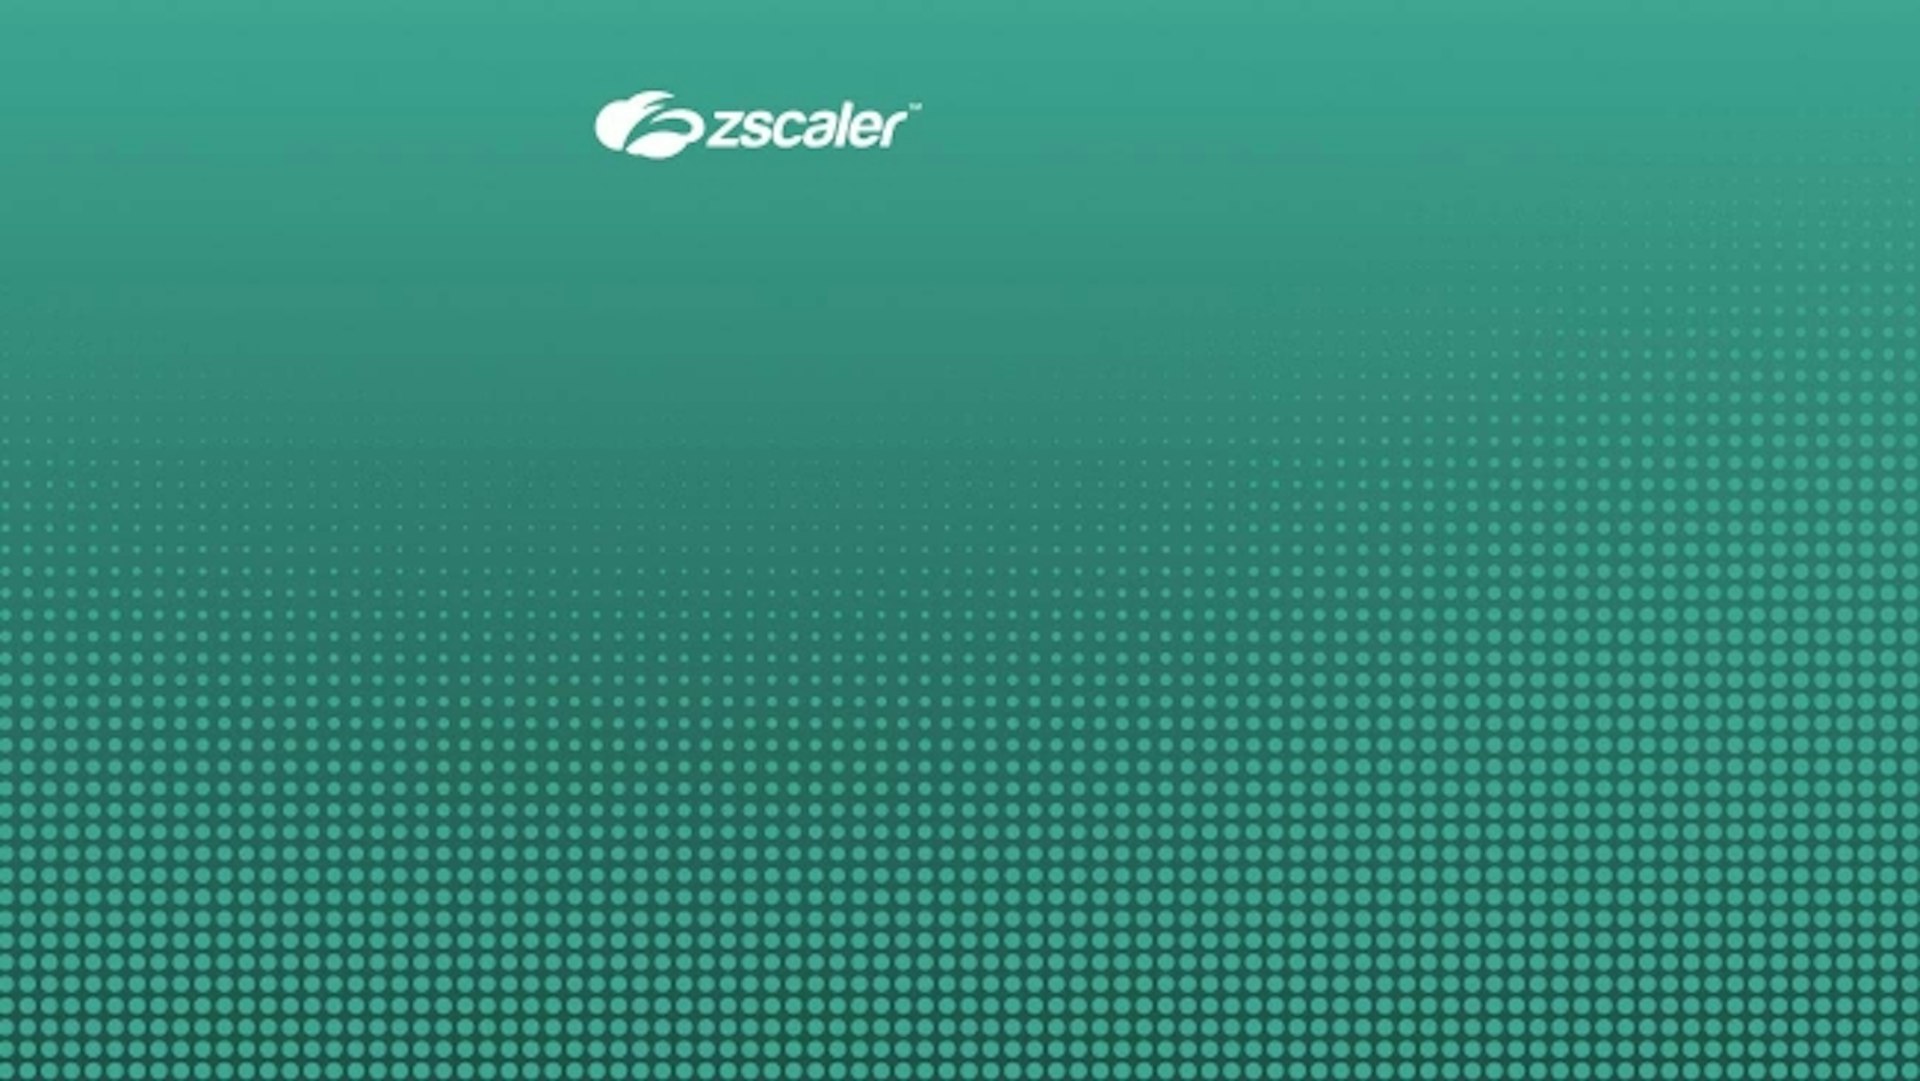 Zscaler and ServiceNow